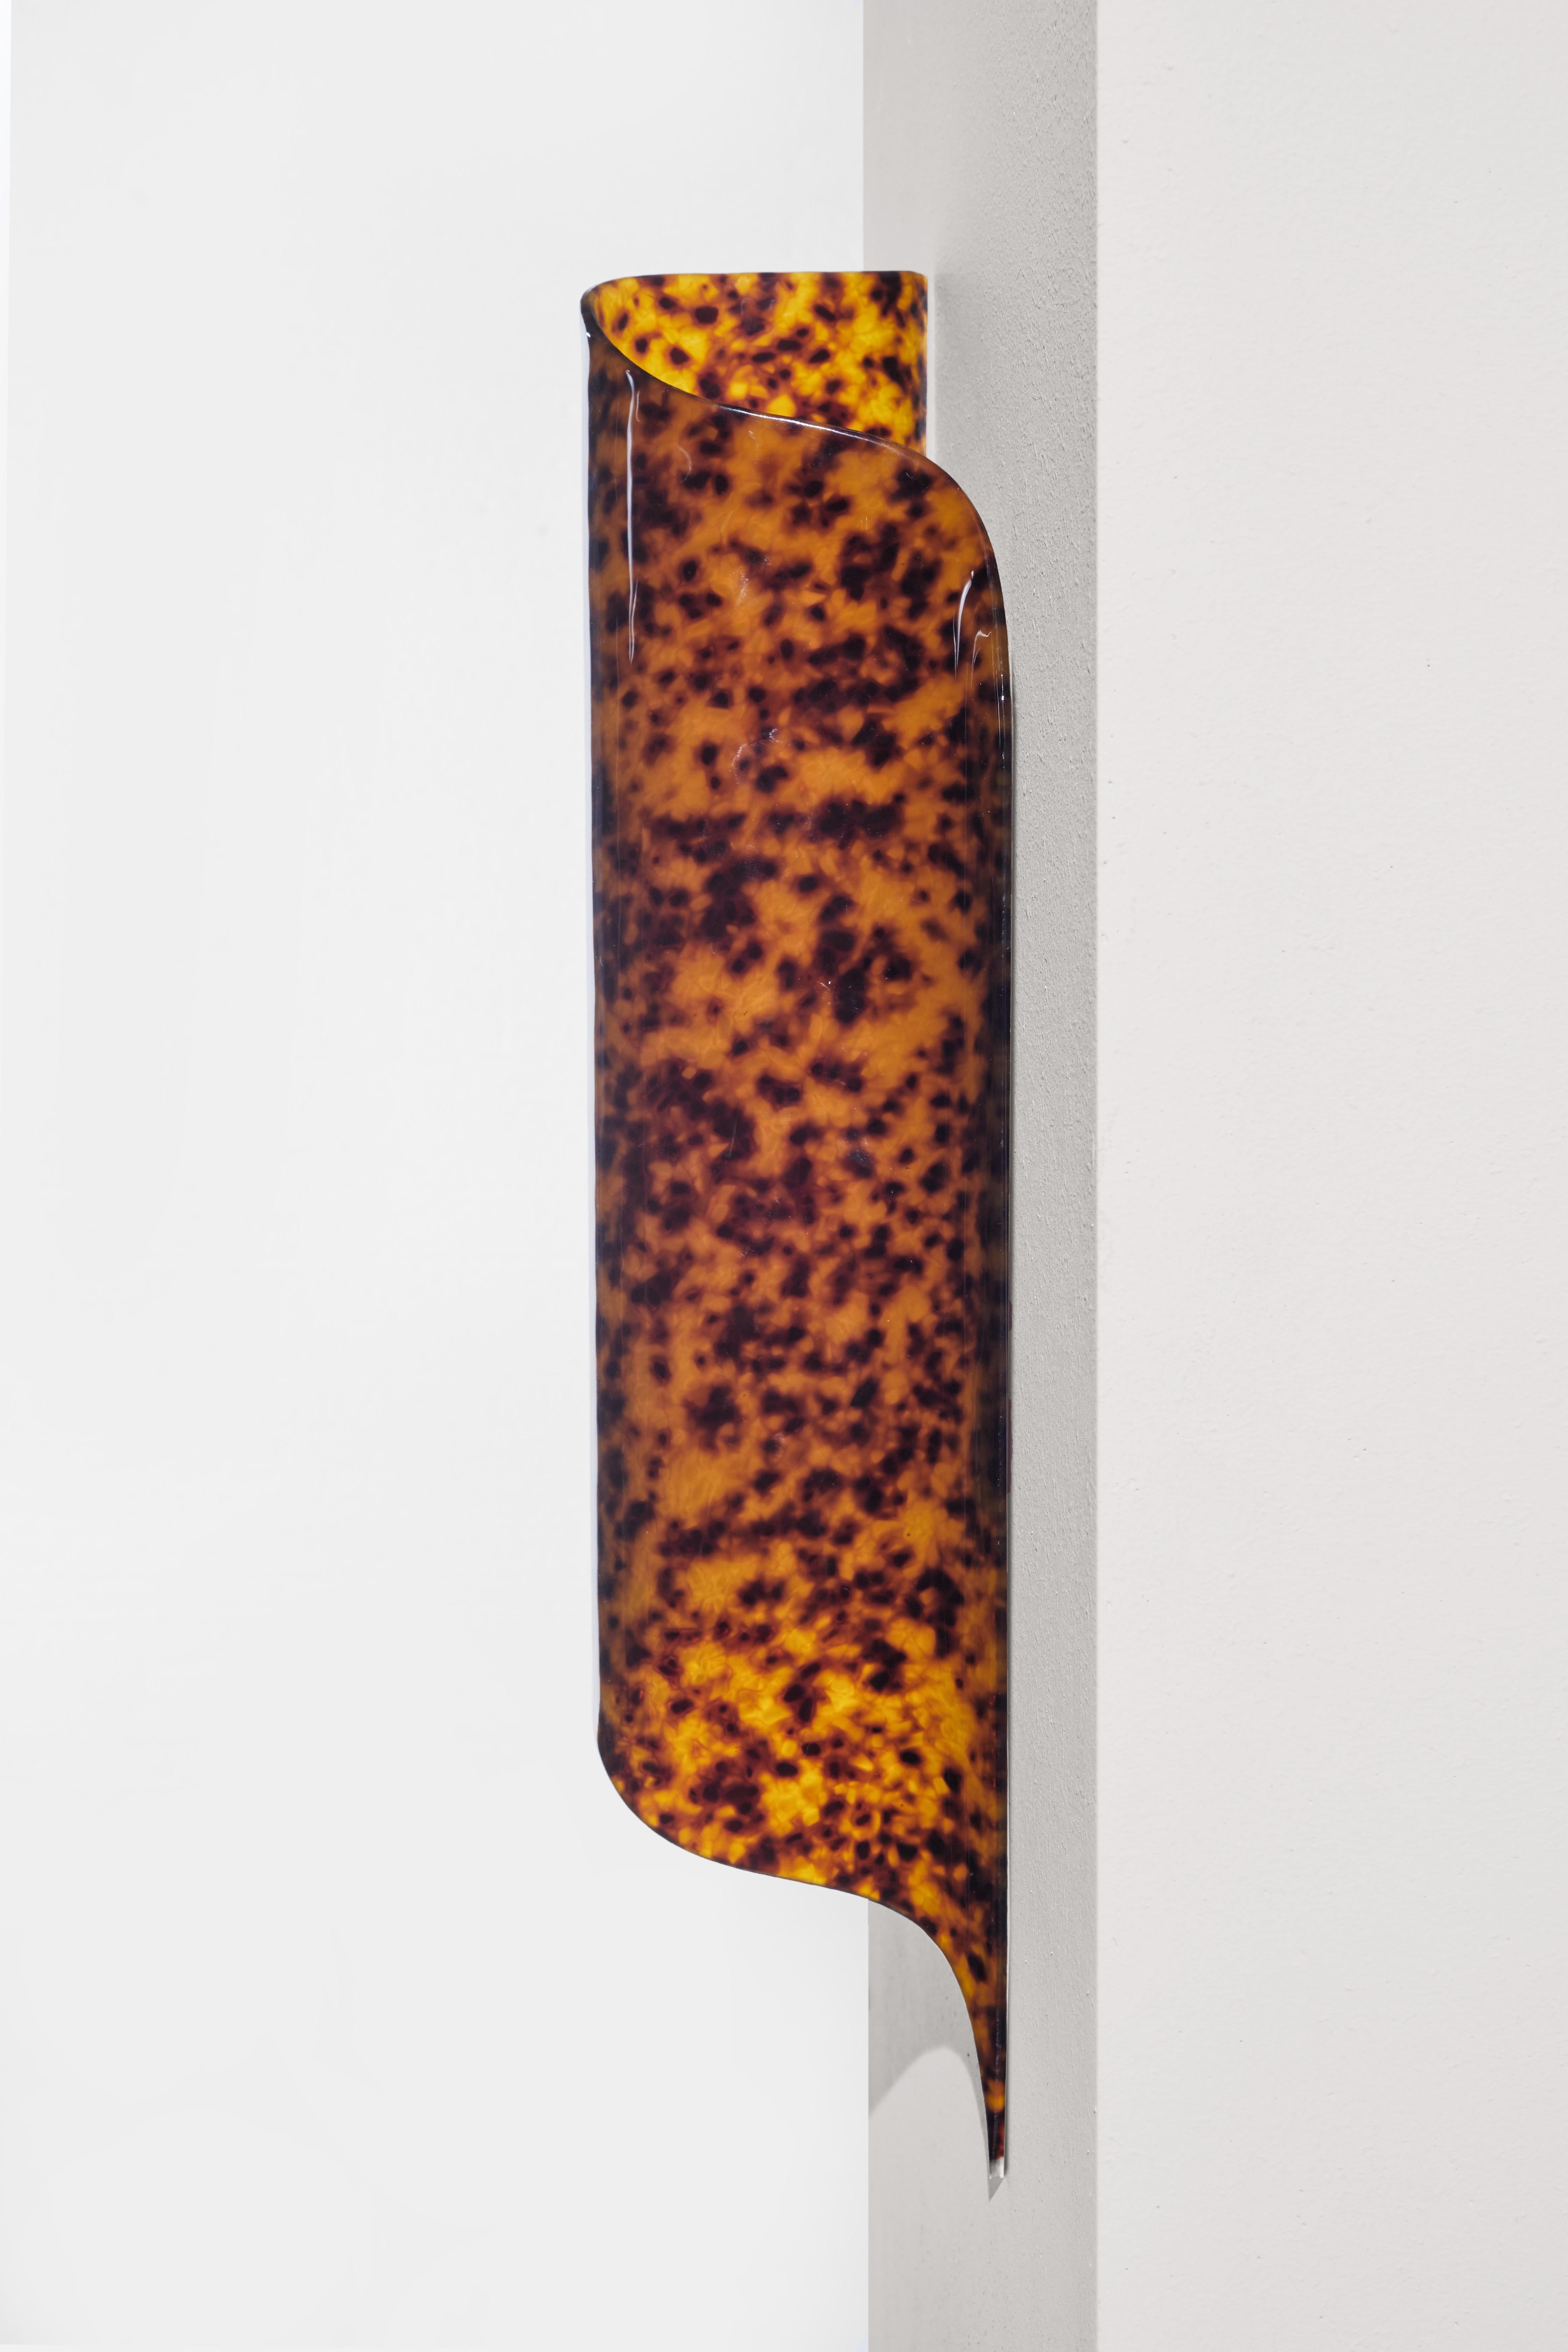 VOODOO wall sconce possesses a smooth translucent tortoise-shell-like surface made of cast acrylic, its beauty comparable to precious stones. A sought after fashion material of the 1950s, the aesthetics of tortoiseshell is having its Renaissance